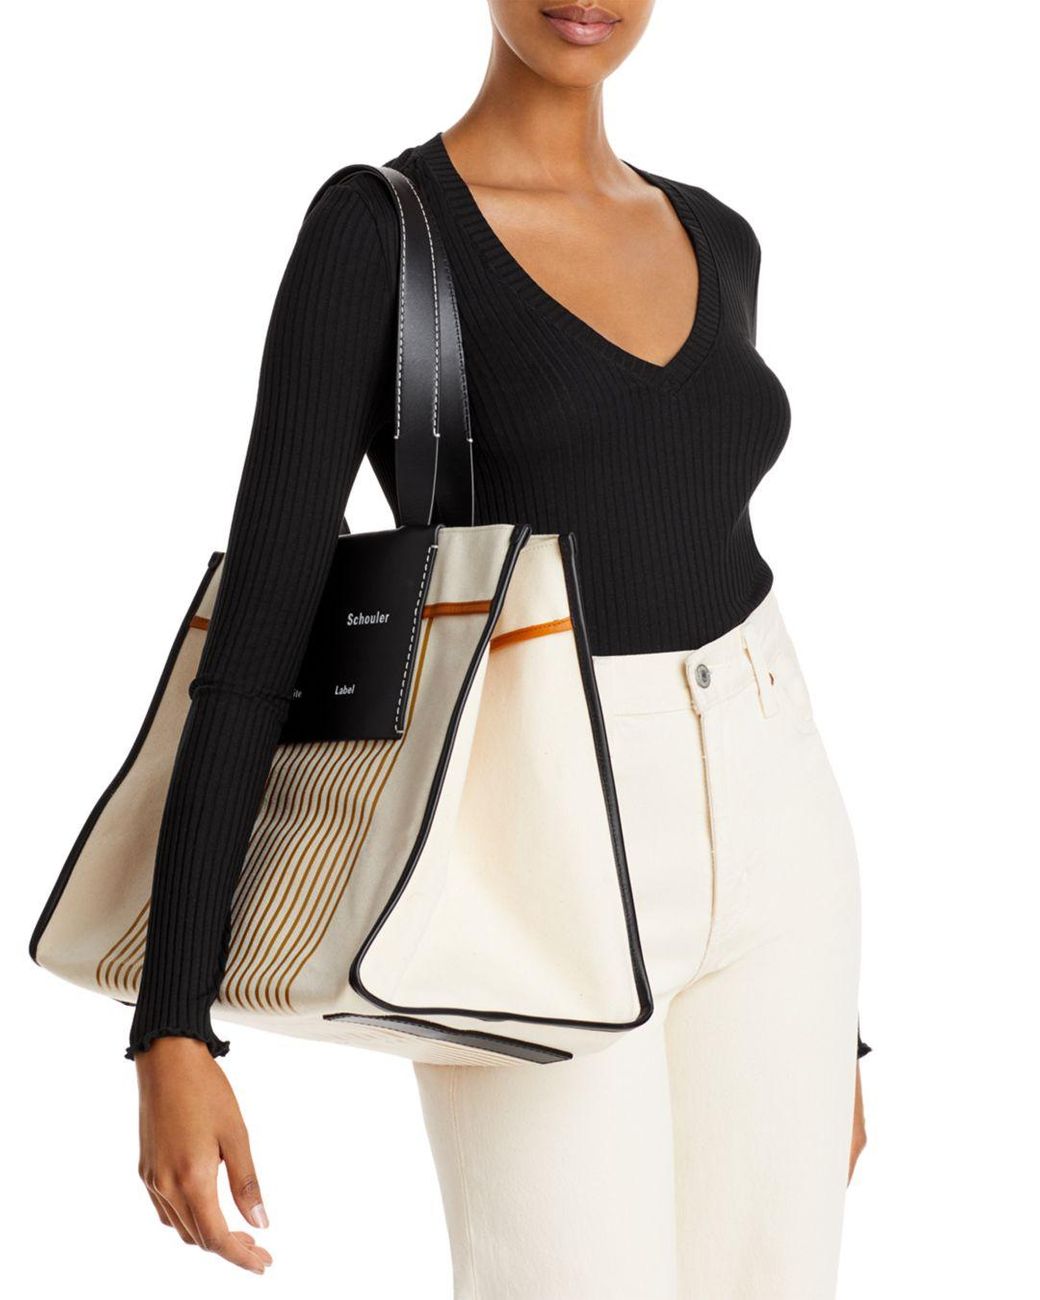 proenza schouler extra large tote Big sale - OFF 74%